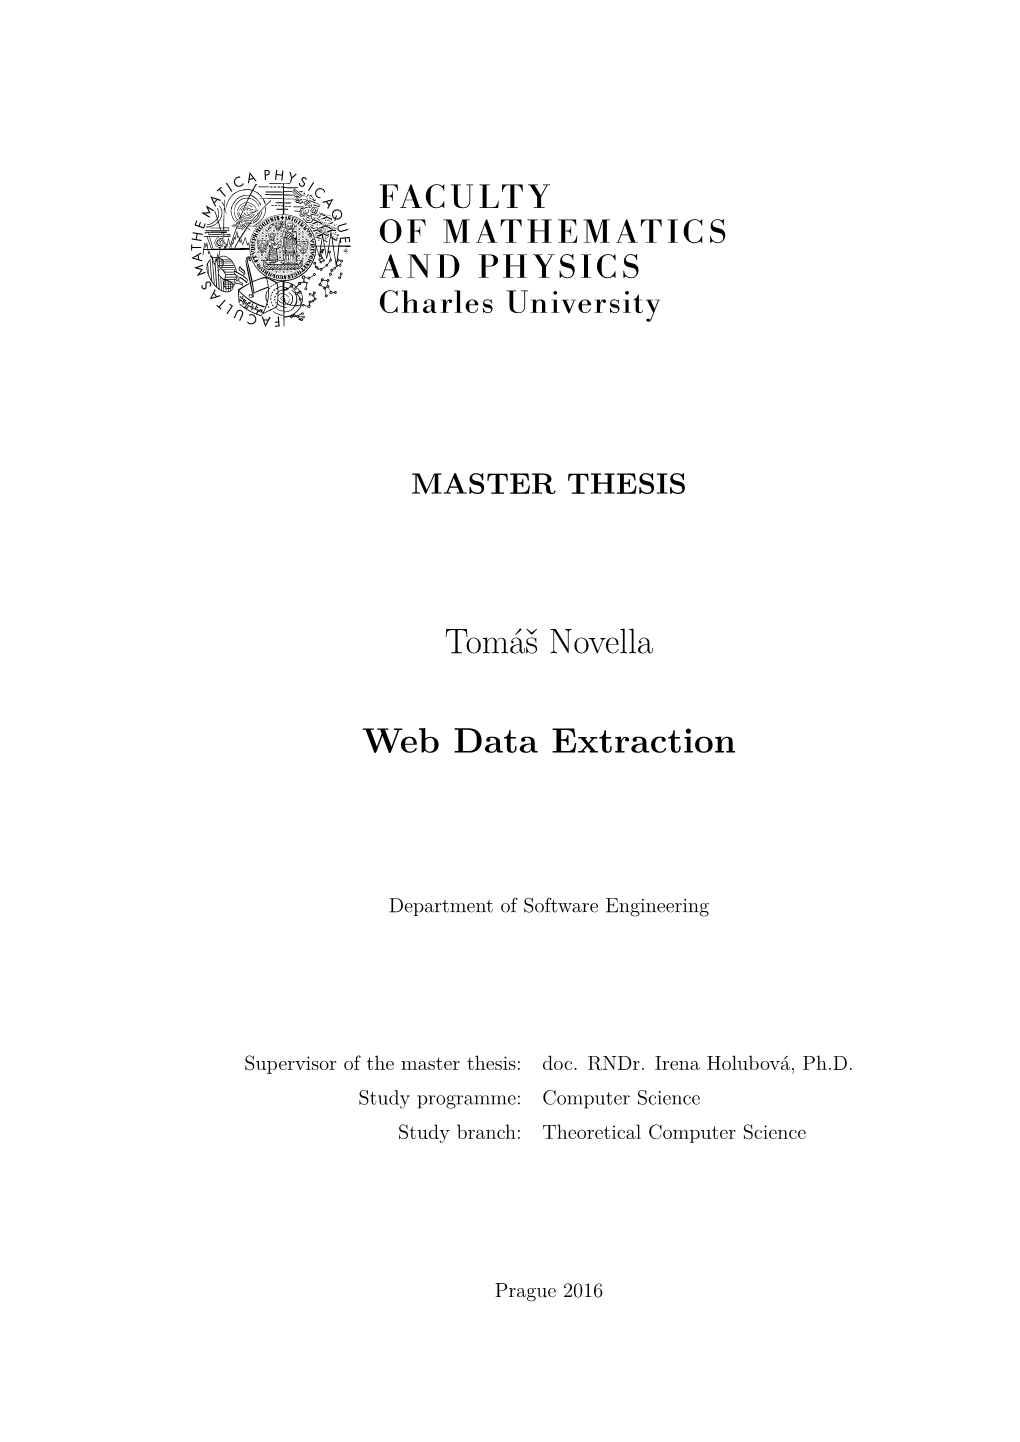 Web Data Extraction